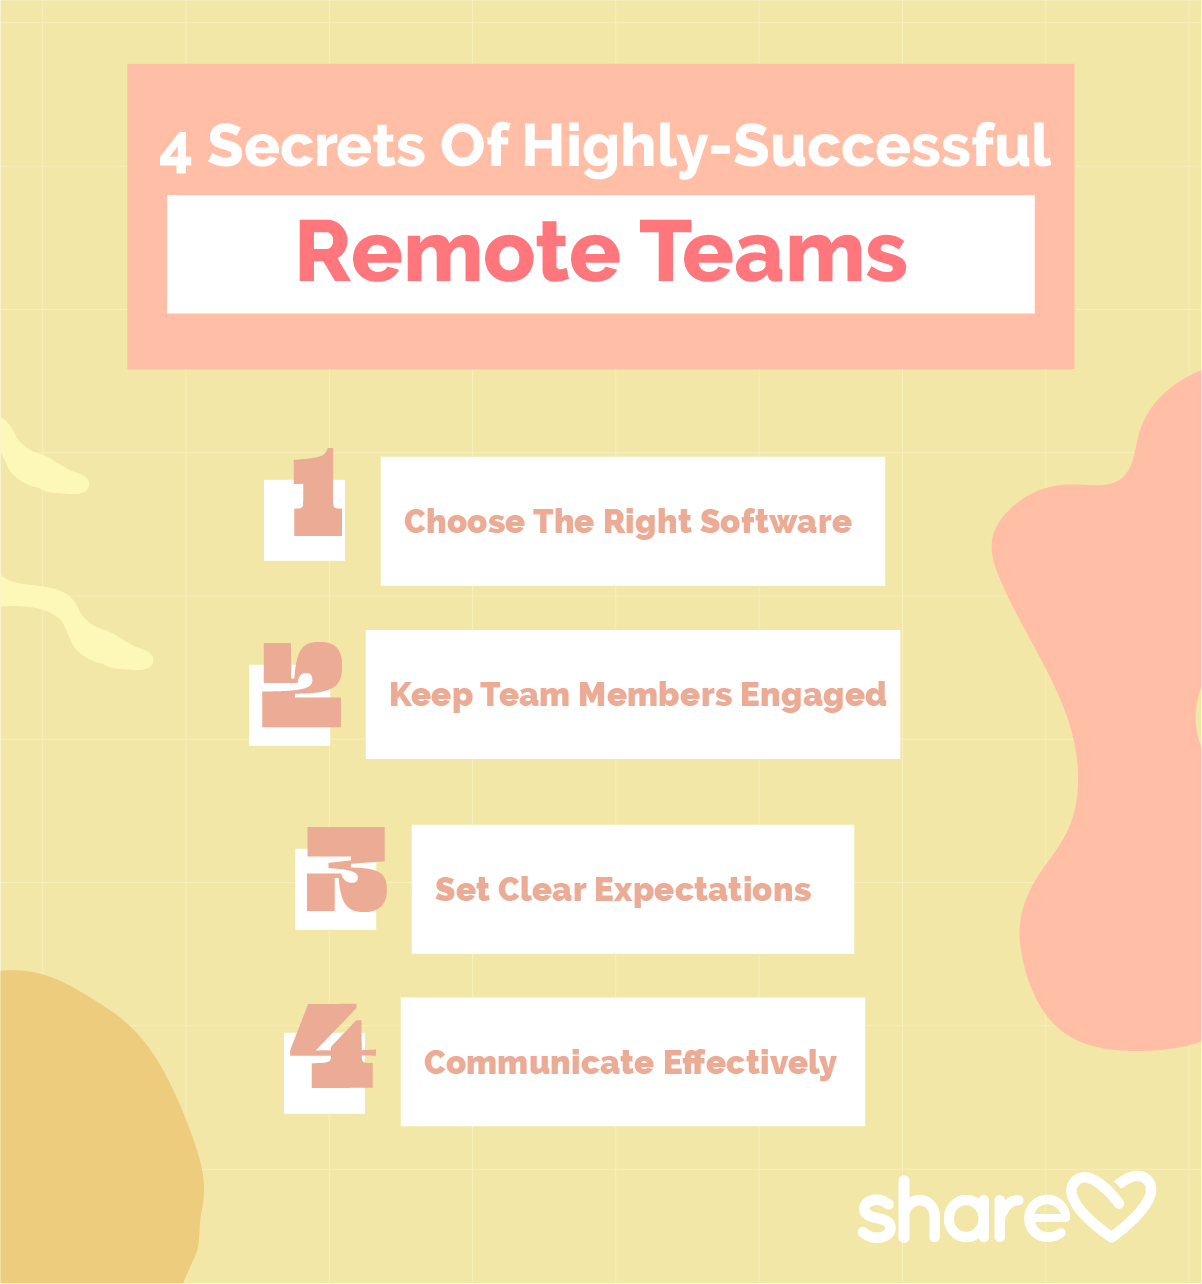 4 Secrets Of Highly-Successful Remote Teams